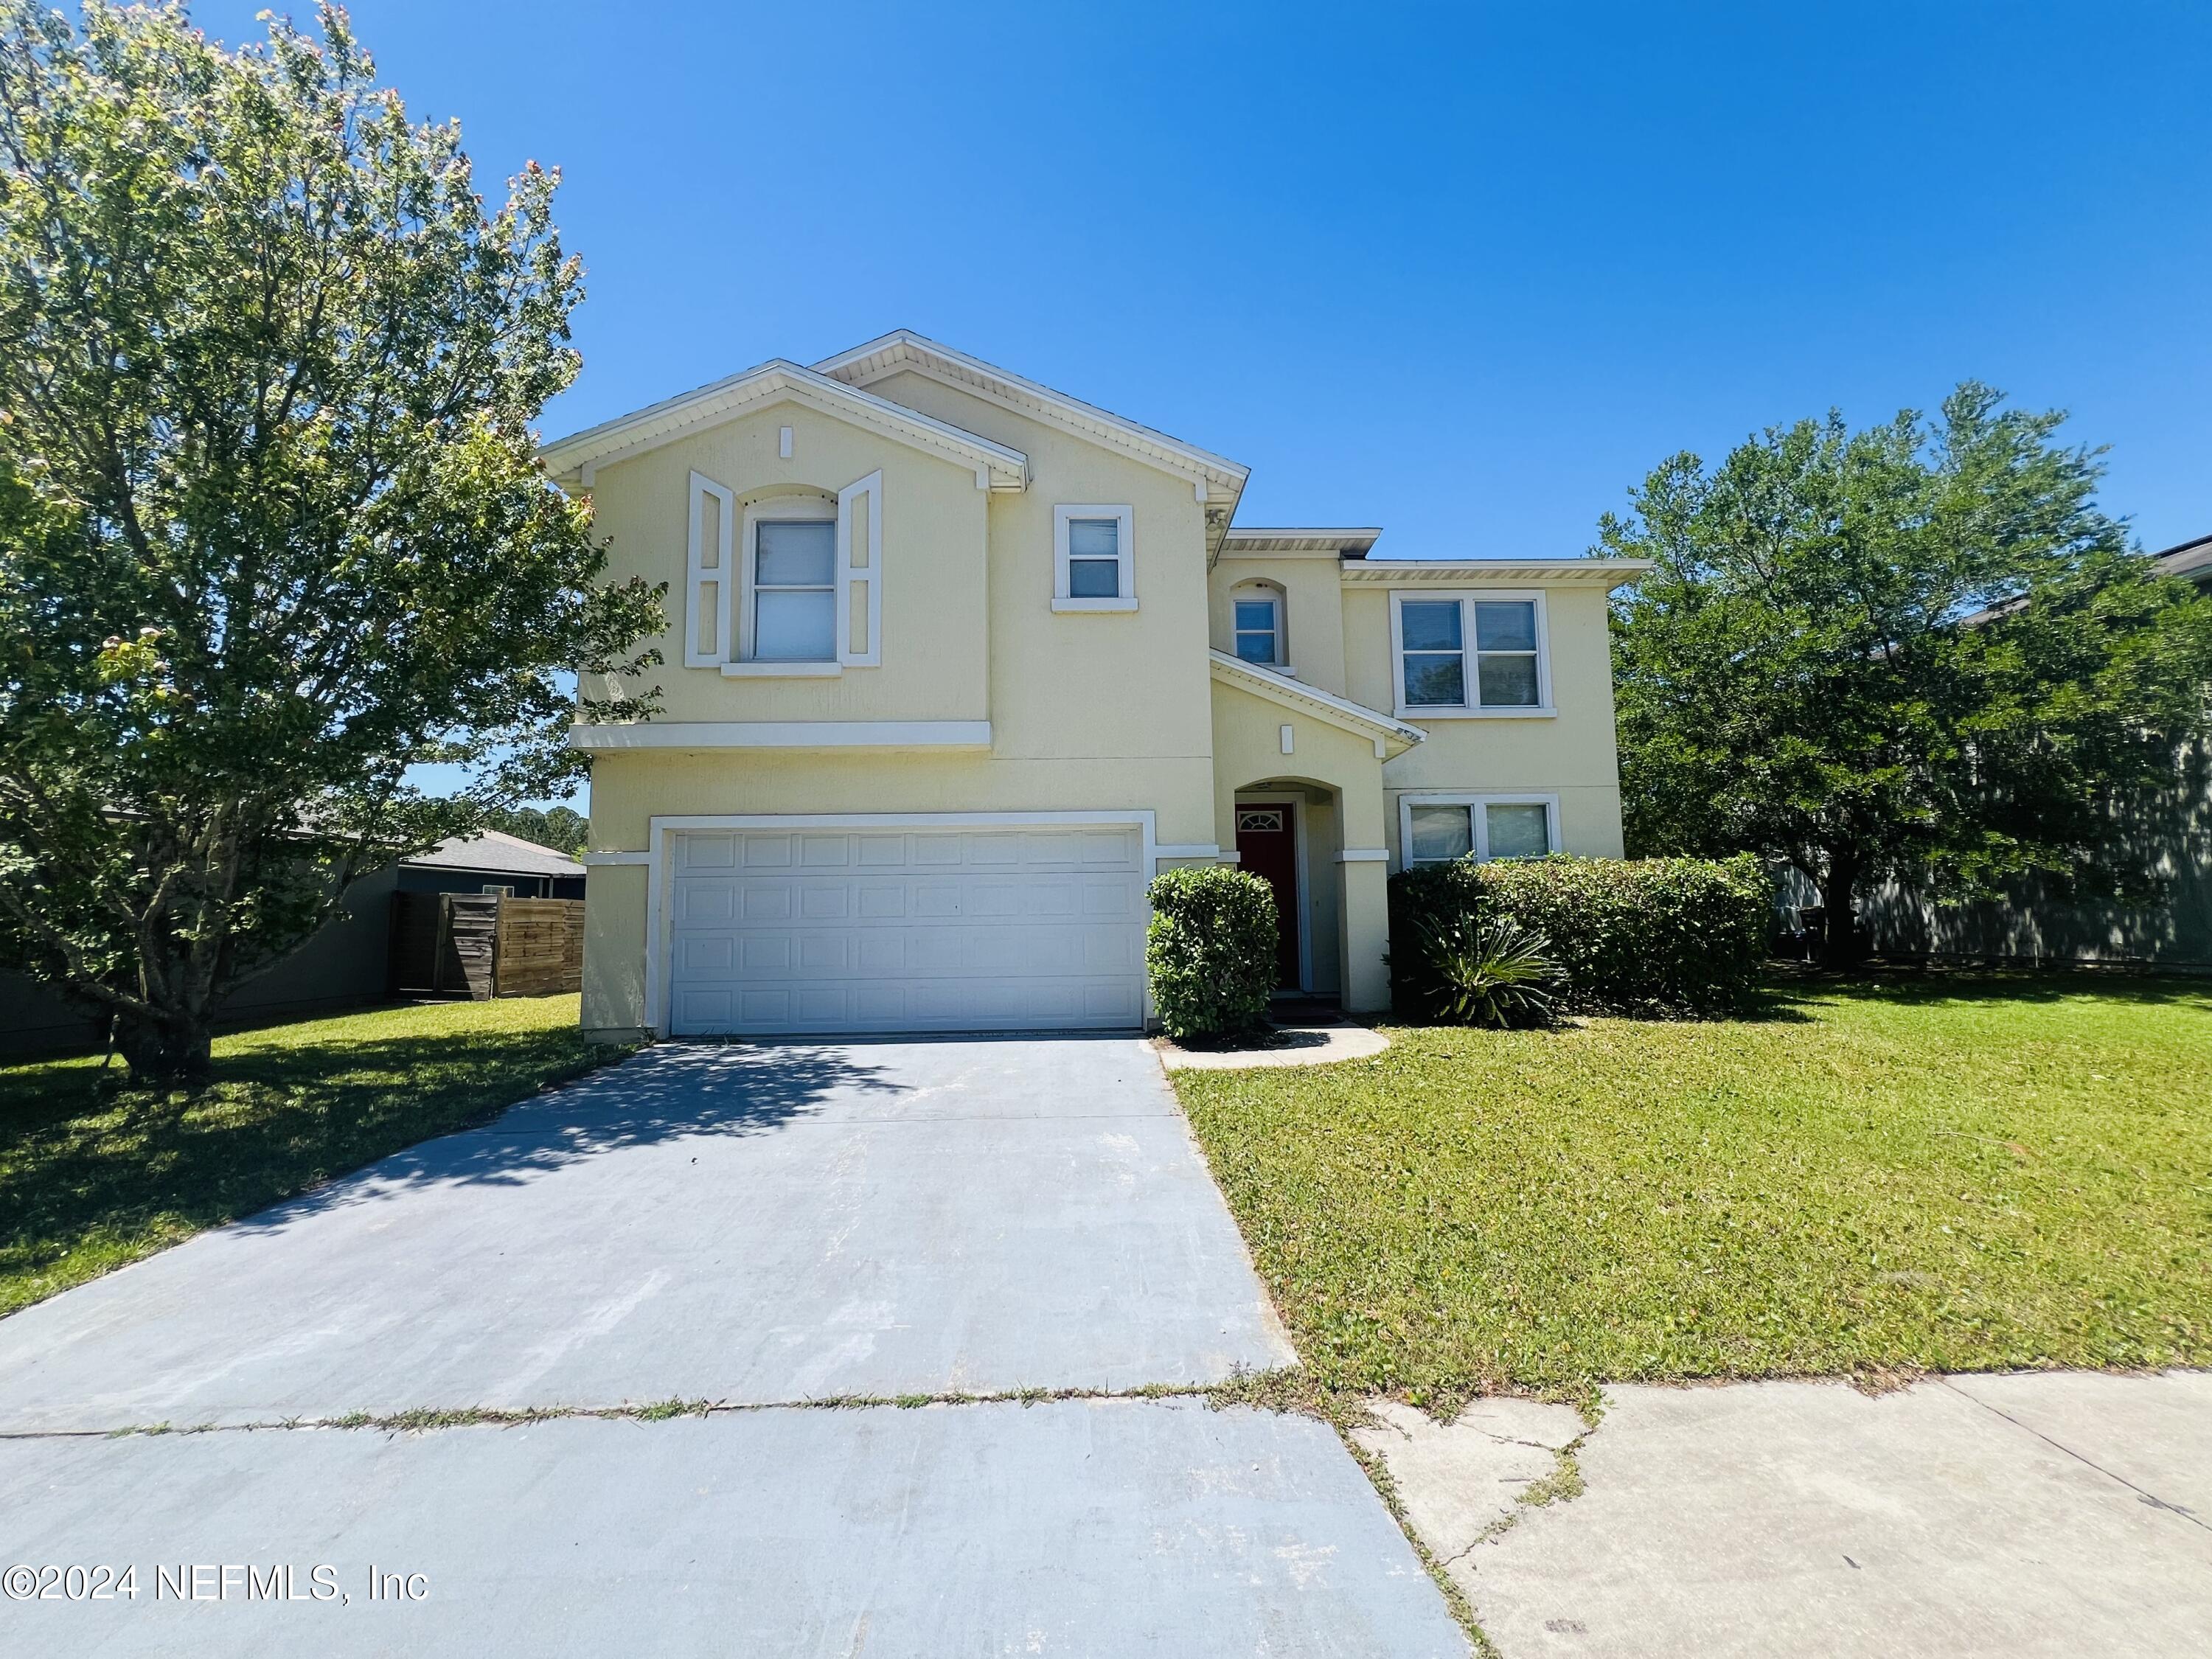 Jacksonville, FL home for sale located at 2532 Reagan Lakes, Jacksonville, FL 32221